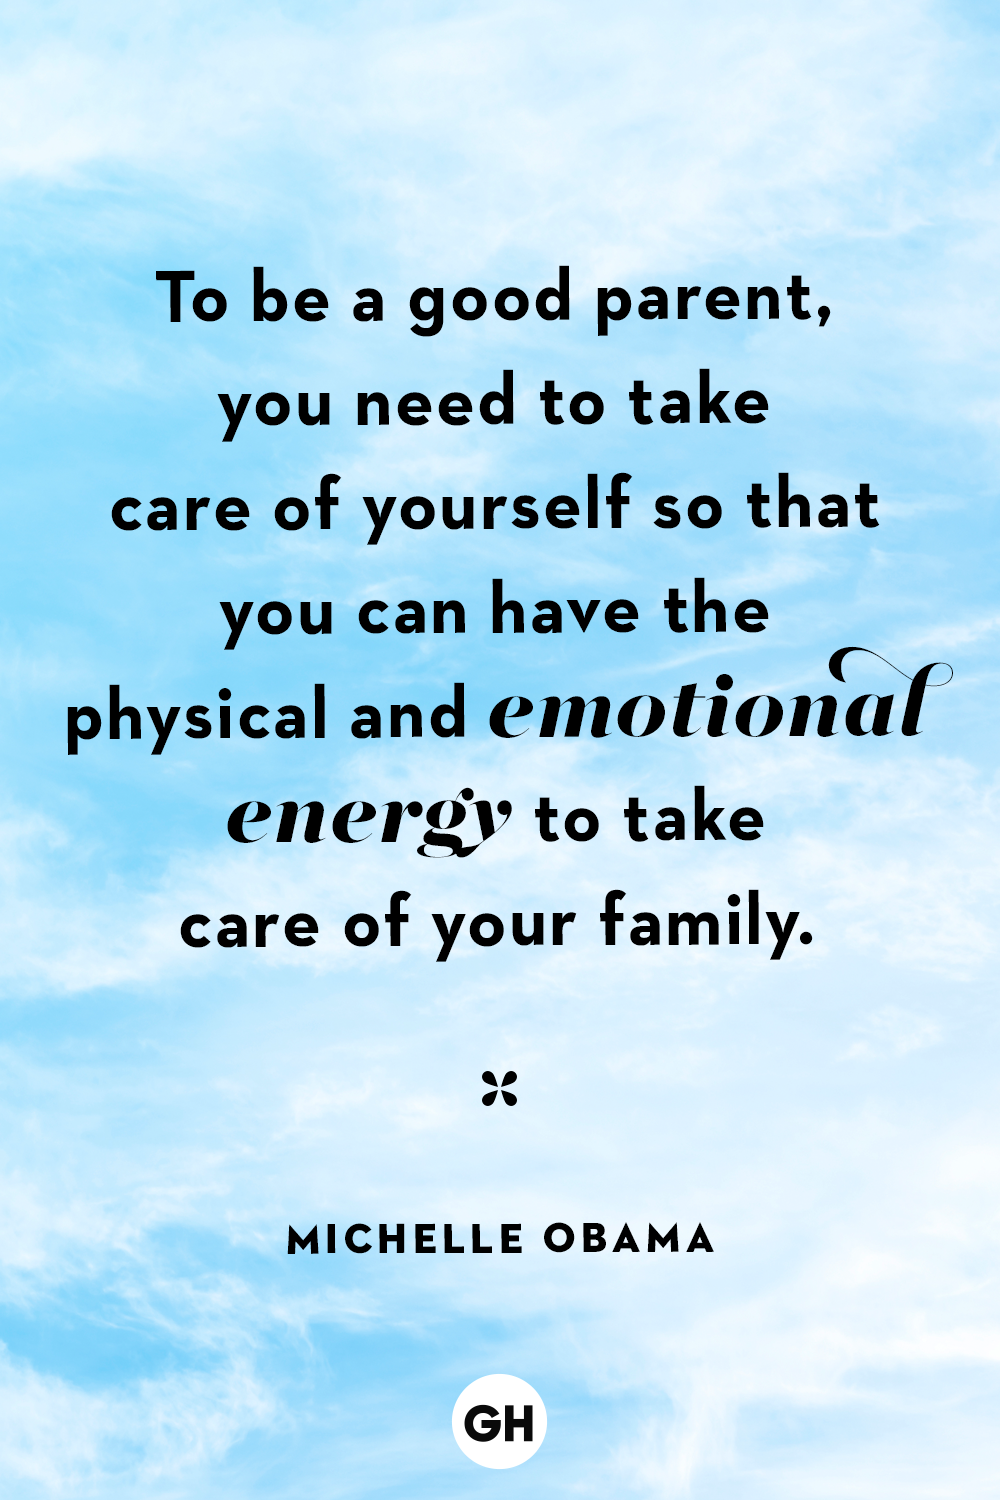 to be a good parent, you need to take care of yourself so taht you can have the physical and emotional energy to take care of your family. michelle obama